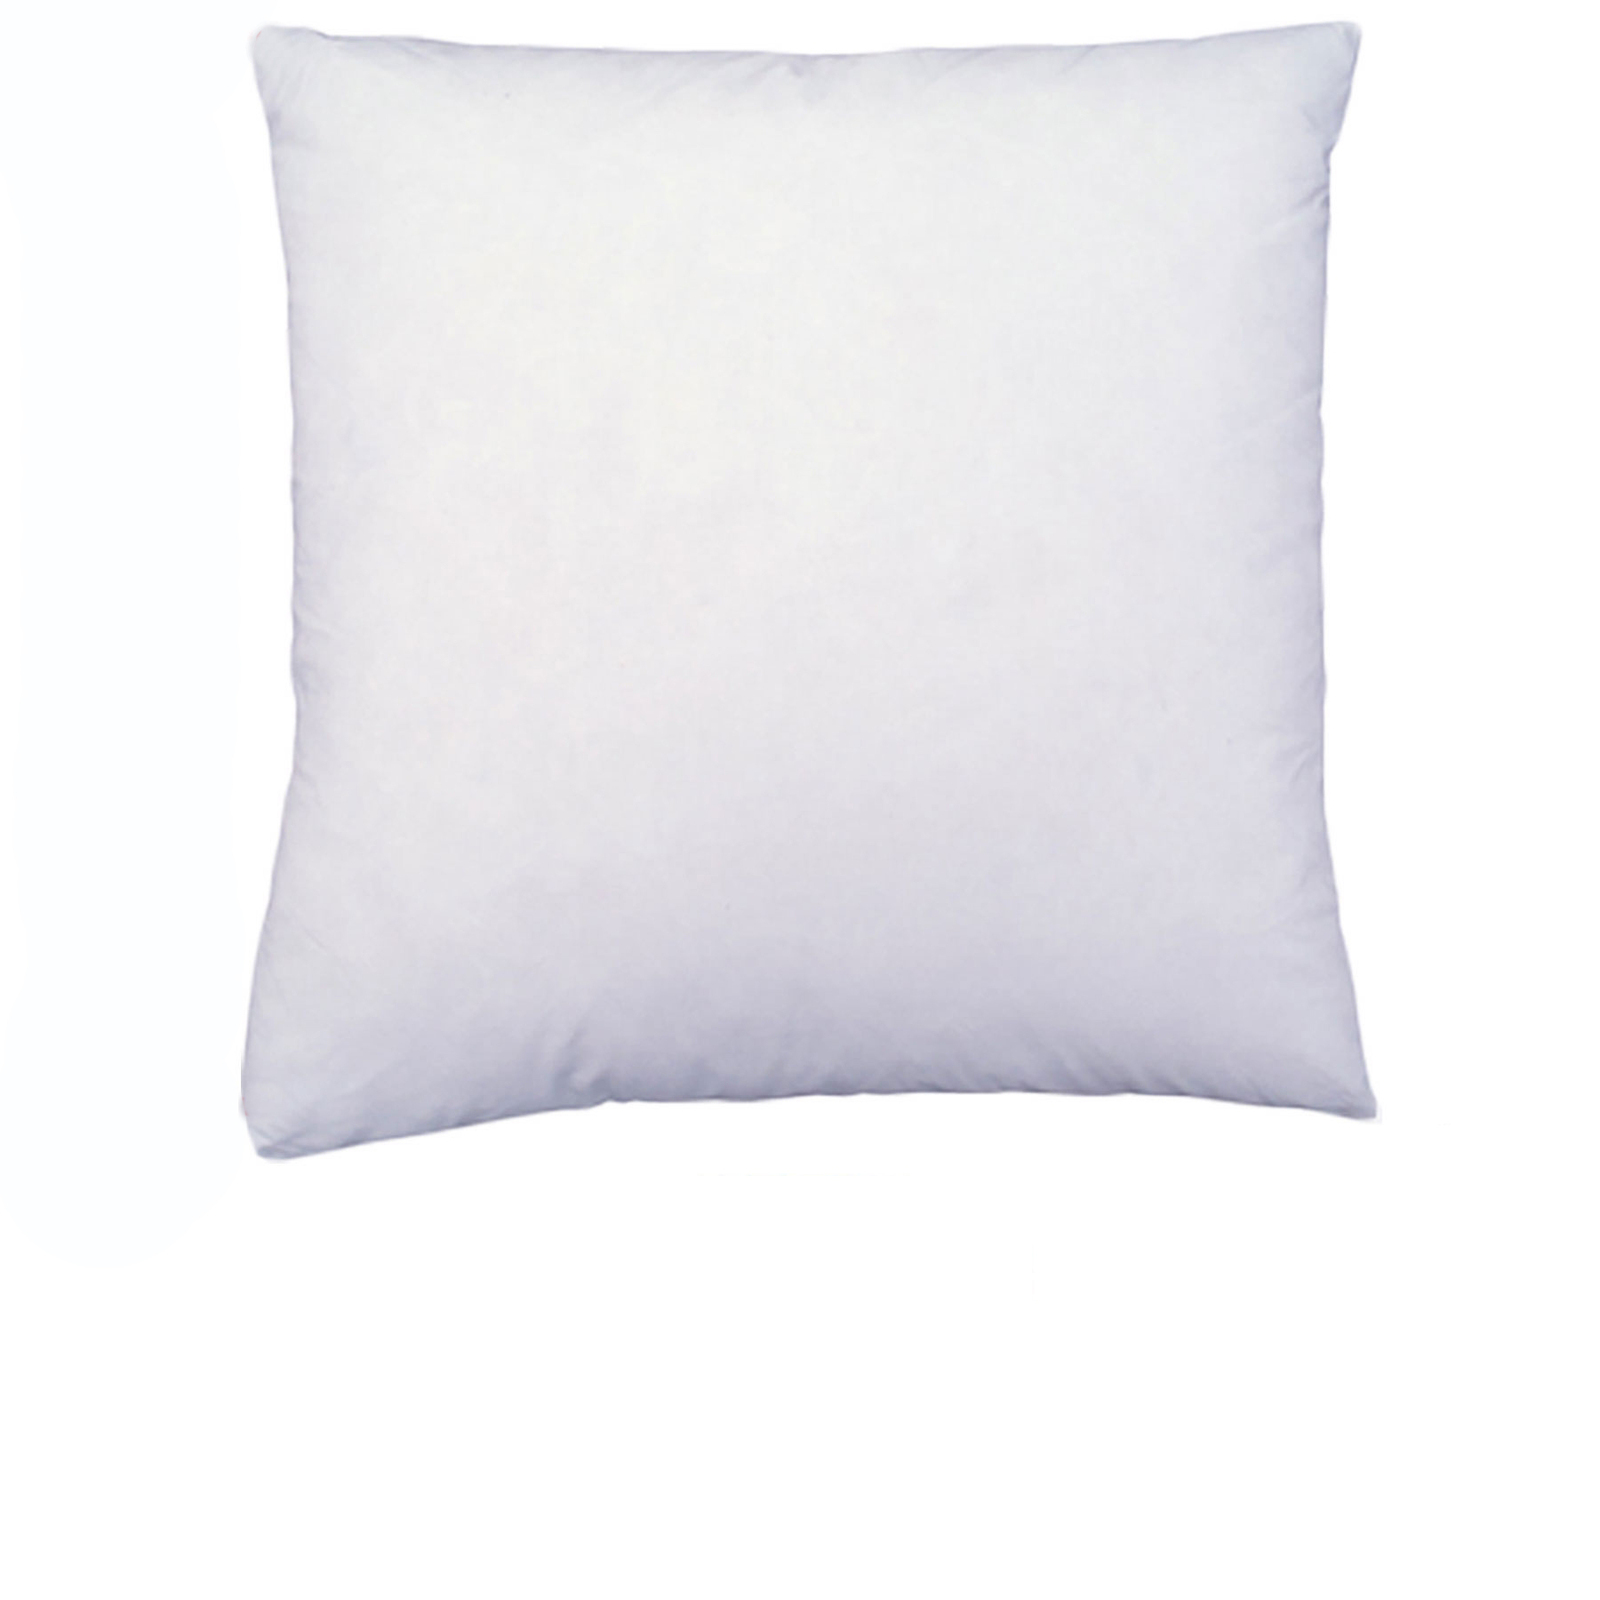 Easyrest Cushion Insert Square Price